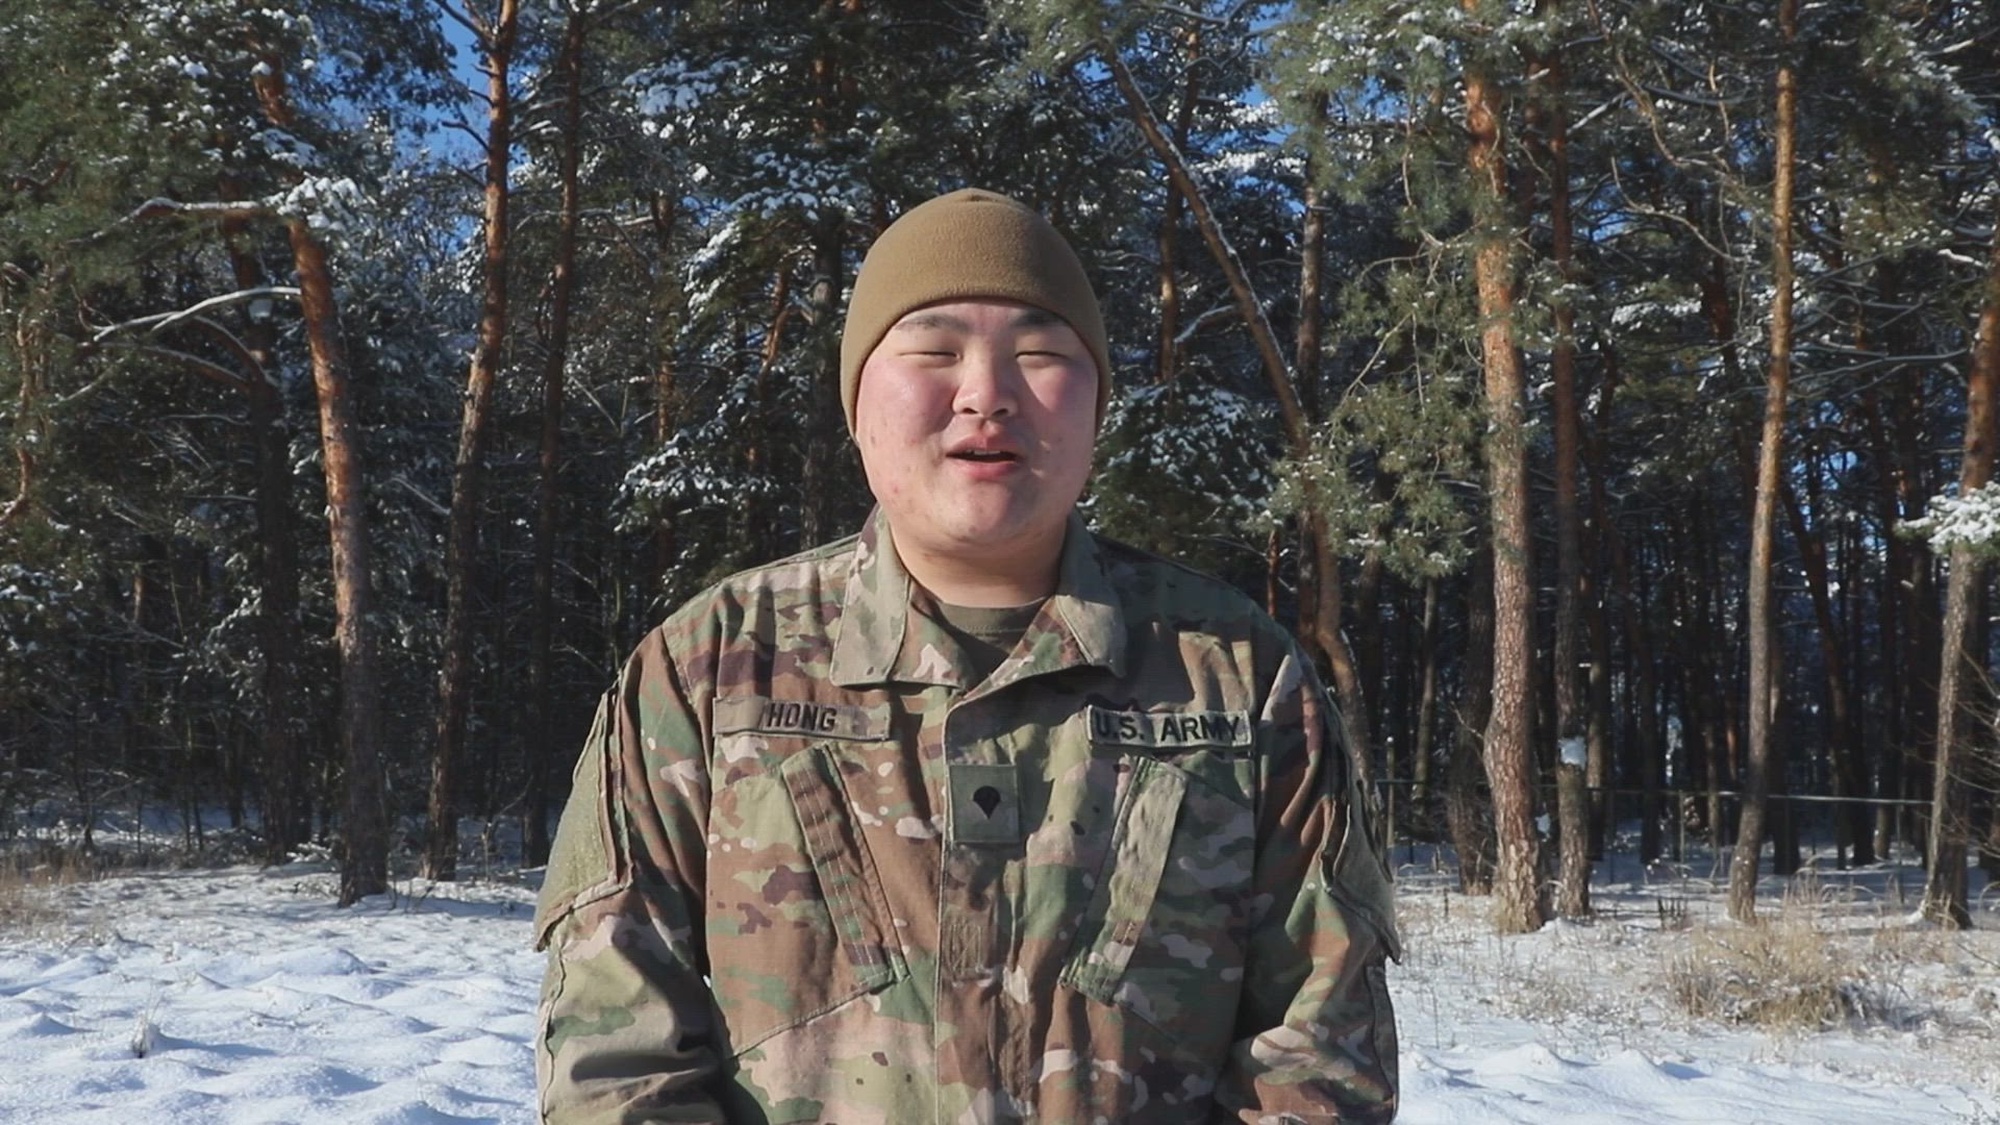 U.S. Army Soldiers assigned to the 3rd Division Sustainment Brigade's Task Force Provider send video messages to families back home throughout the month of January while deployed to Europe and conducting operations and training to assure allies and deter adversaries in the region.
U.S. Army Spc. Richard Hong, assigned to the 87th Division Sustainment Support Battalion, 3rd Division Sustainment Brigade, 3rd Infantry Division, gives a shoutout to his wife for Valentine's Day on Karliki, Poland, Jan. 20, 2024. 
U.S. Army Sgt. Justin Robinson, assigned to the 87th Division Sustainment Support Battalion, 3rd Division Sustainment Brigade, 3rd Infantry Division, gives a shoutout to his family for Valentine's Day on Karliki, Poland, Jan. 20, 2024. 
U.S. Army Pfc. Robert Taylor, assigned to the 87th Division Sustainment Support Battalion, 3rd Division Sustainment Brigade, 3rd Infantry Division, gives a shoutout to his family for Valentine's Day on Karliki, Poland, Jan. 20, 2024. 
U.S. Army Spc. Brea Hunter, assigned to the 87th Division Sustainment Support Battalion, 3rd Division Sustainment Brigade, 3rd Infantry Division, gives a shoutout to her family for Valentine's Day on Karliki, Poland, Jan. 20, 2024. 
U.S. Army Pfc. David Robinson, assigned to the 87th Division Sustainment Support Battalion, 3rd Division Sustainment Brigade, 3rd Infantry Division, gives a shoutout to his family for Valentine's Day on Karliki, Poland, Jan. 20, 2024. 
U.S. Army Spc. Luis Torres, assigned to the 87th Division Sustainment Support Battalion, 3rd Division Sustainment Brigade, 3rd Infantry Division, gives a shoutout to his family for Valentine's Day on Karliki, Poland, Jan. 20, 2024. 
U.S. Army Pfc. Quindale Thomas, assigned to the 87th Division Sustainment Support Battalion, 3rd Division Sustainment Brigade, 3rd Infantry Division, gives a shoutout to his family for Valentine's Day on Karliki, Poland, Jan. 20, 2024. 
U.S. Army Pvt. Nicolas Walker, assigned to the 87th Division Sustai